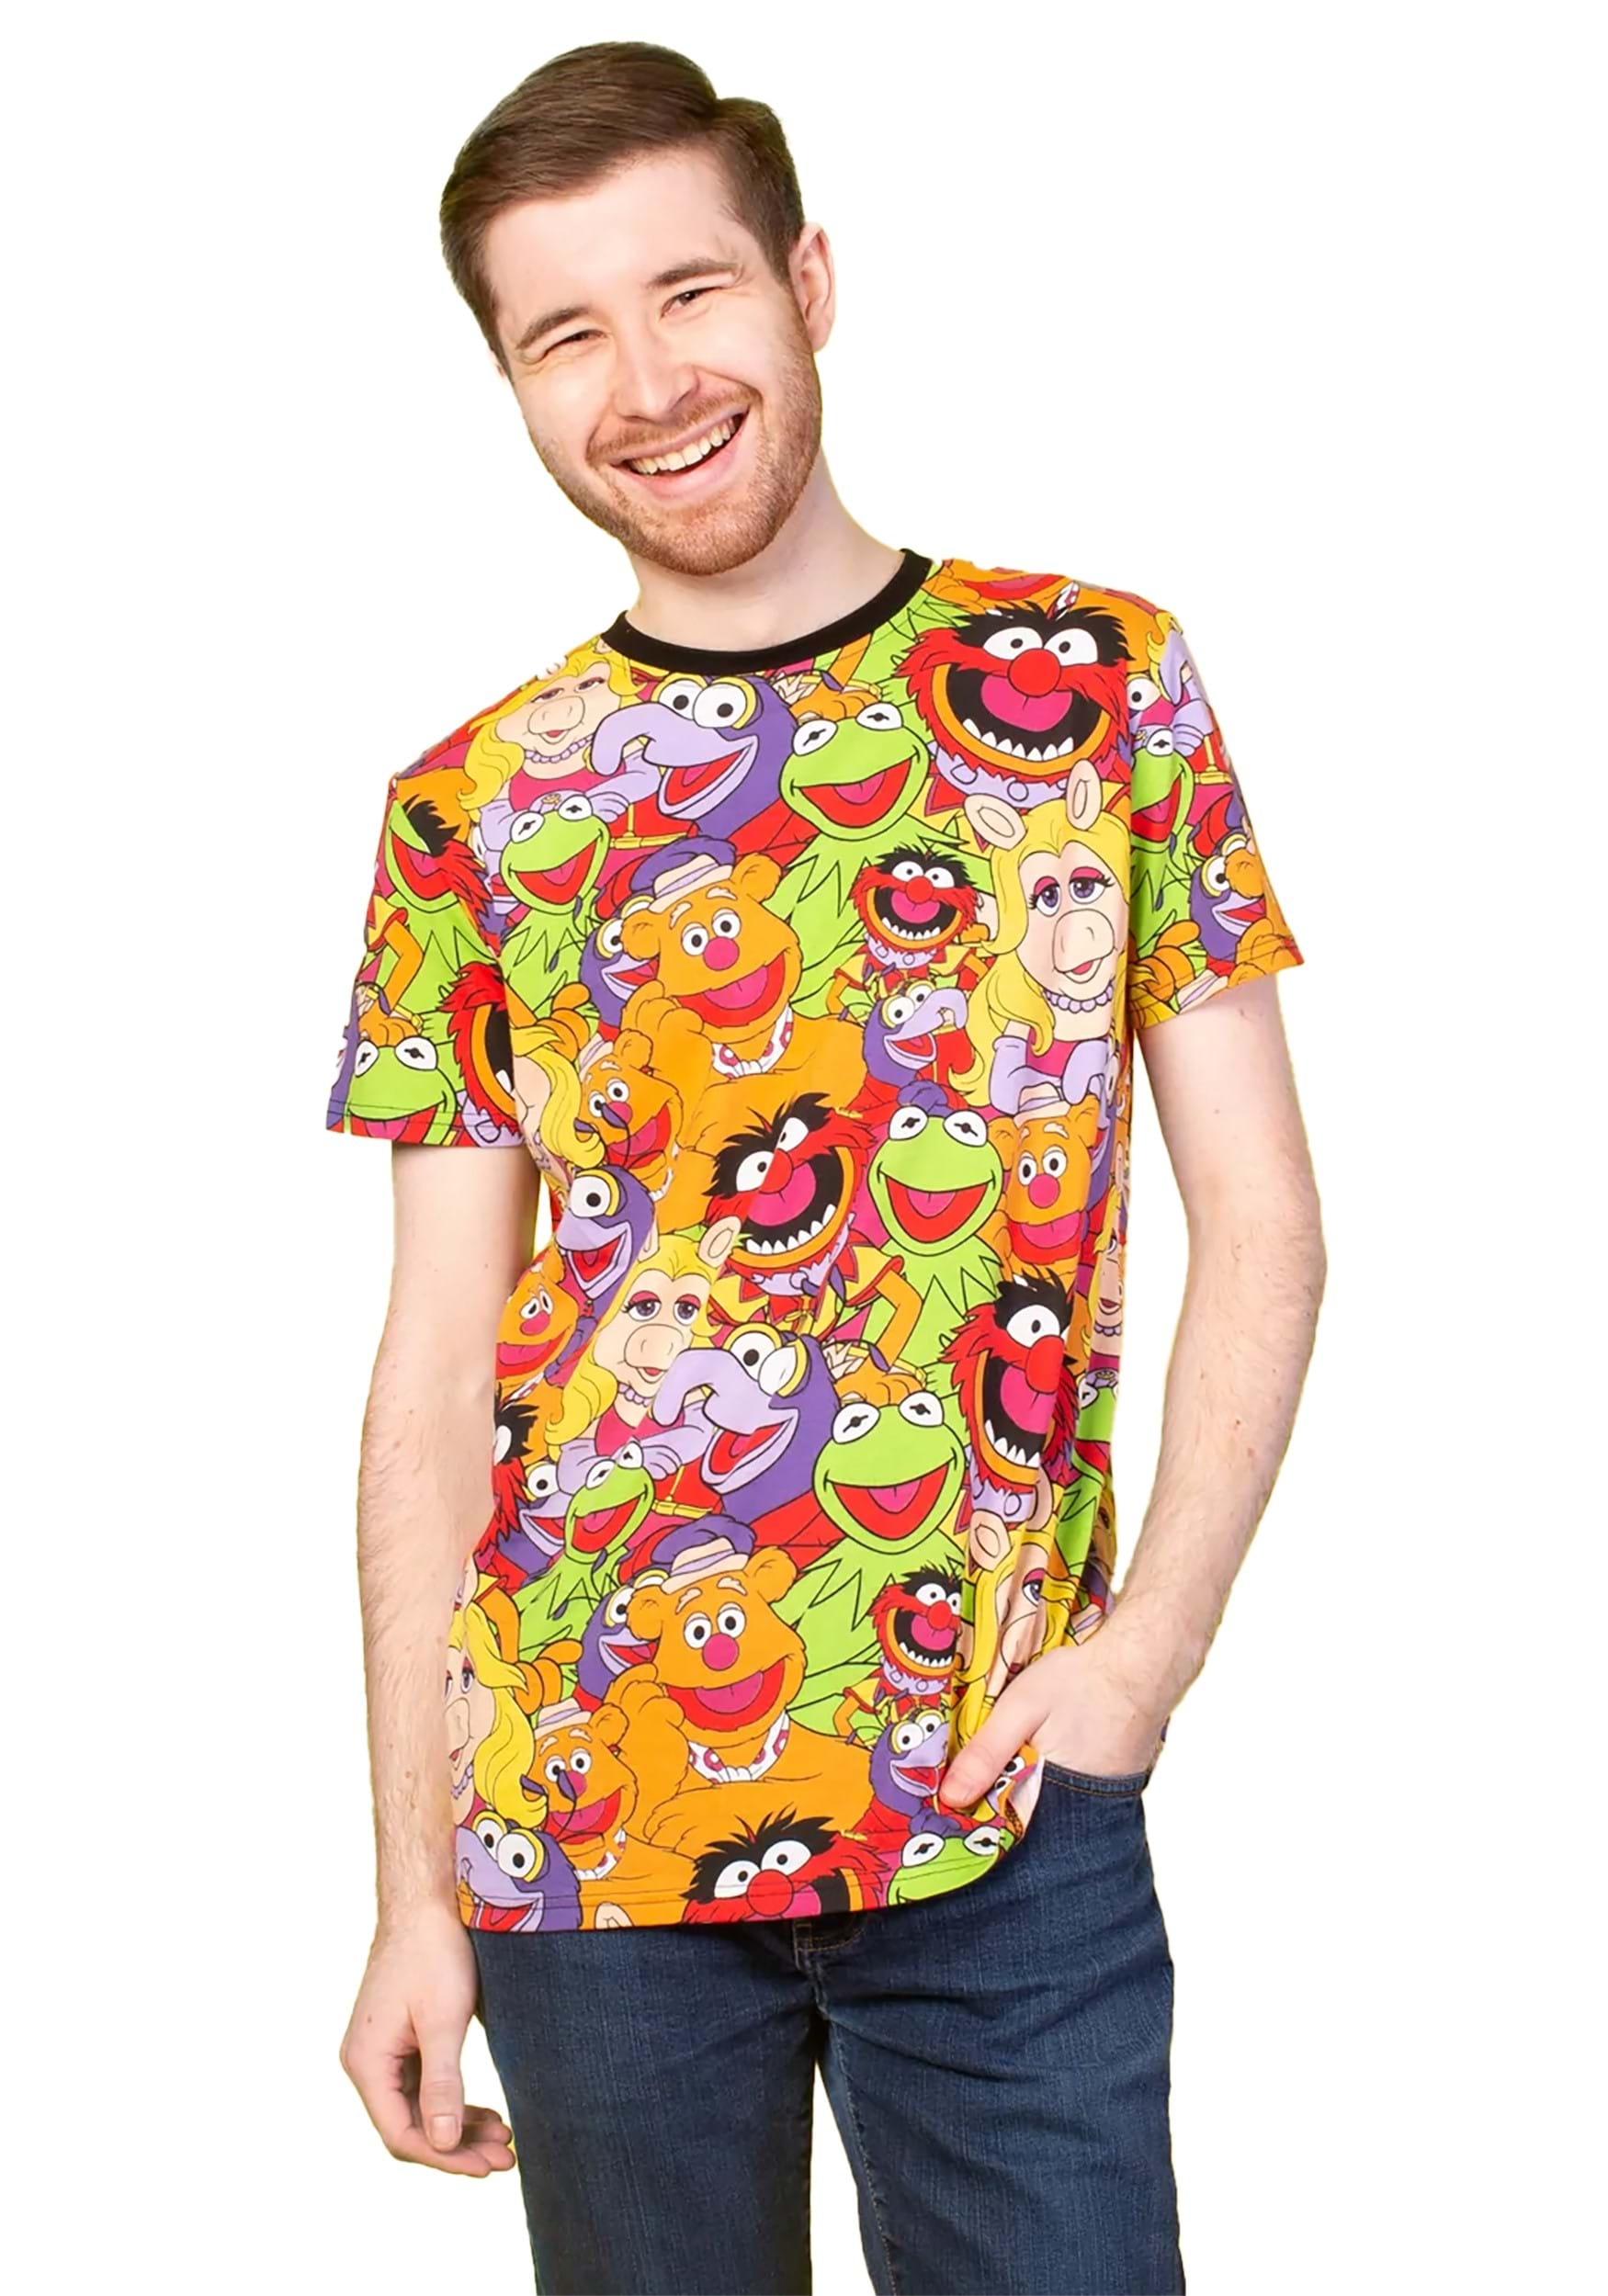 Muppets All Over Print Adult Shirt by Cakeworthy